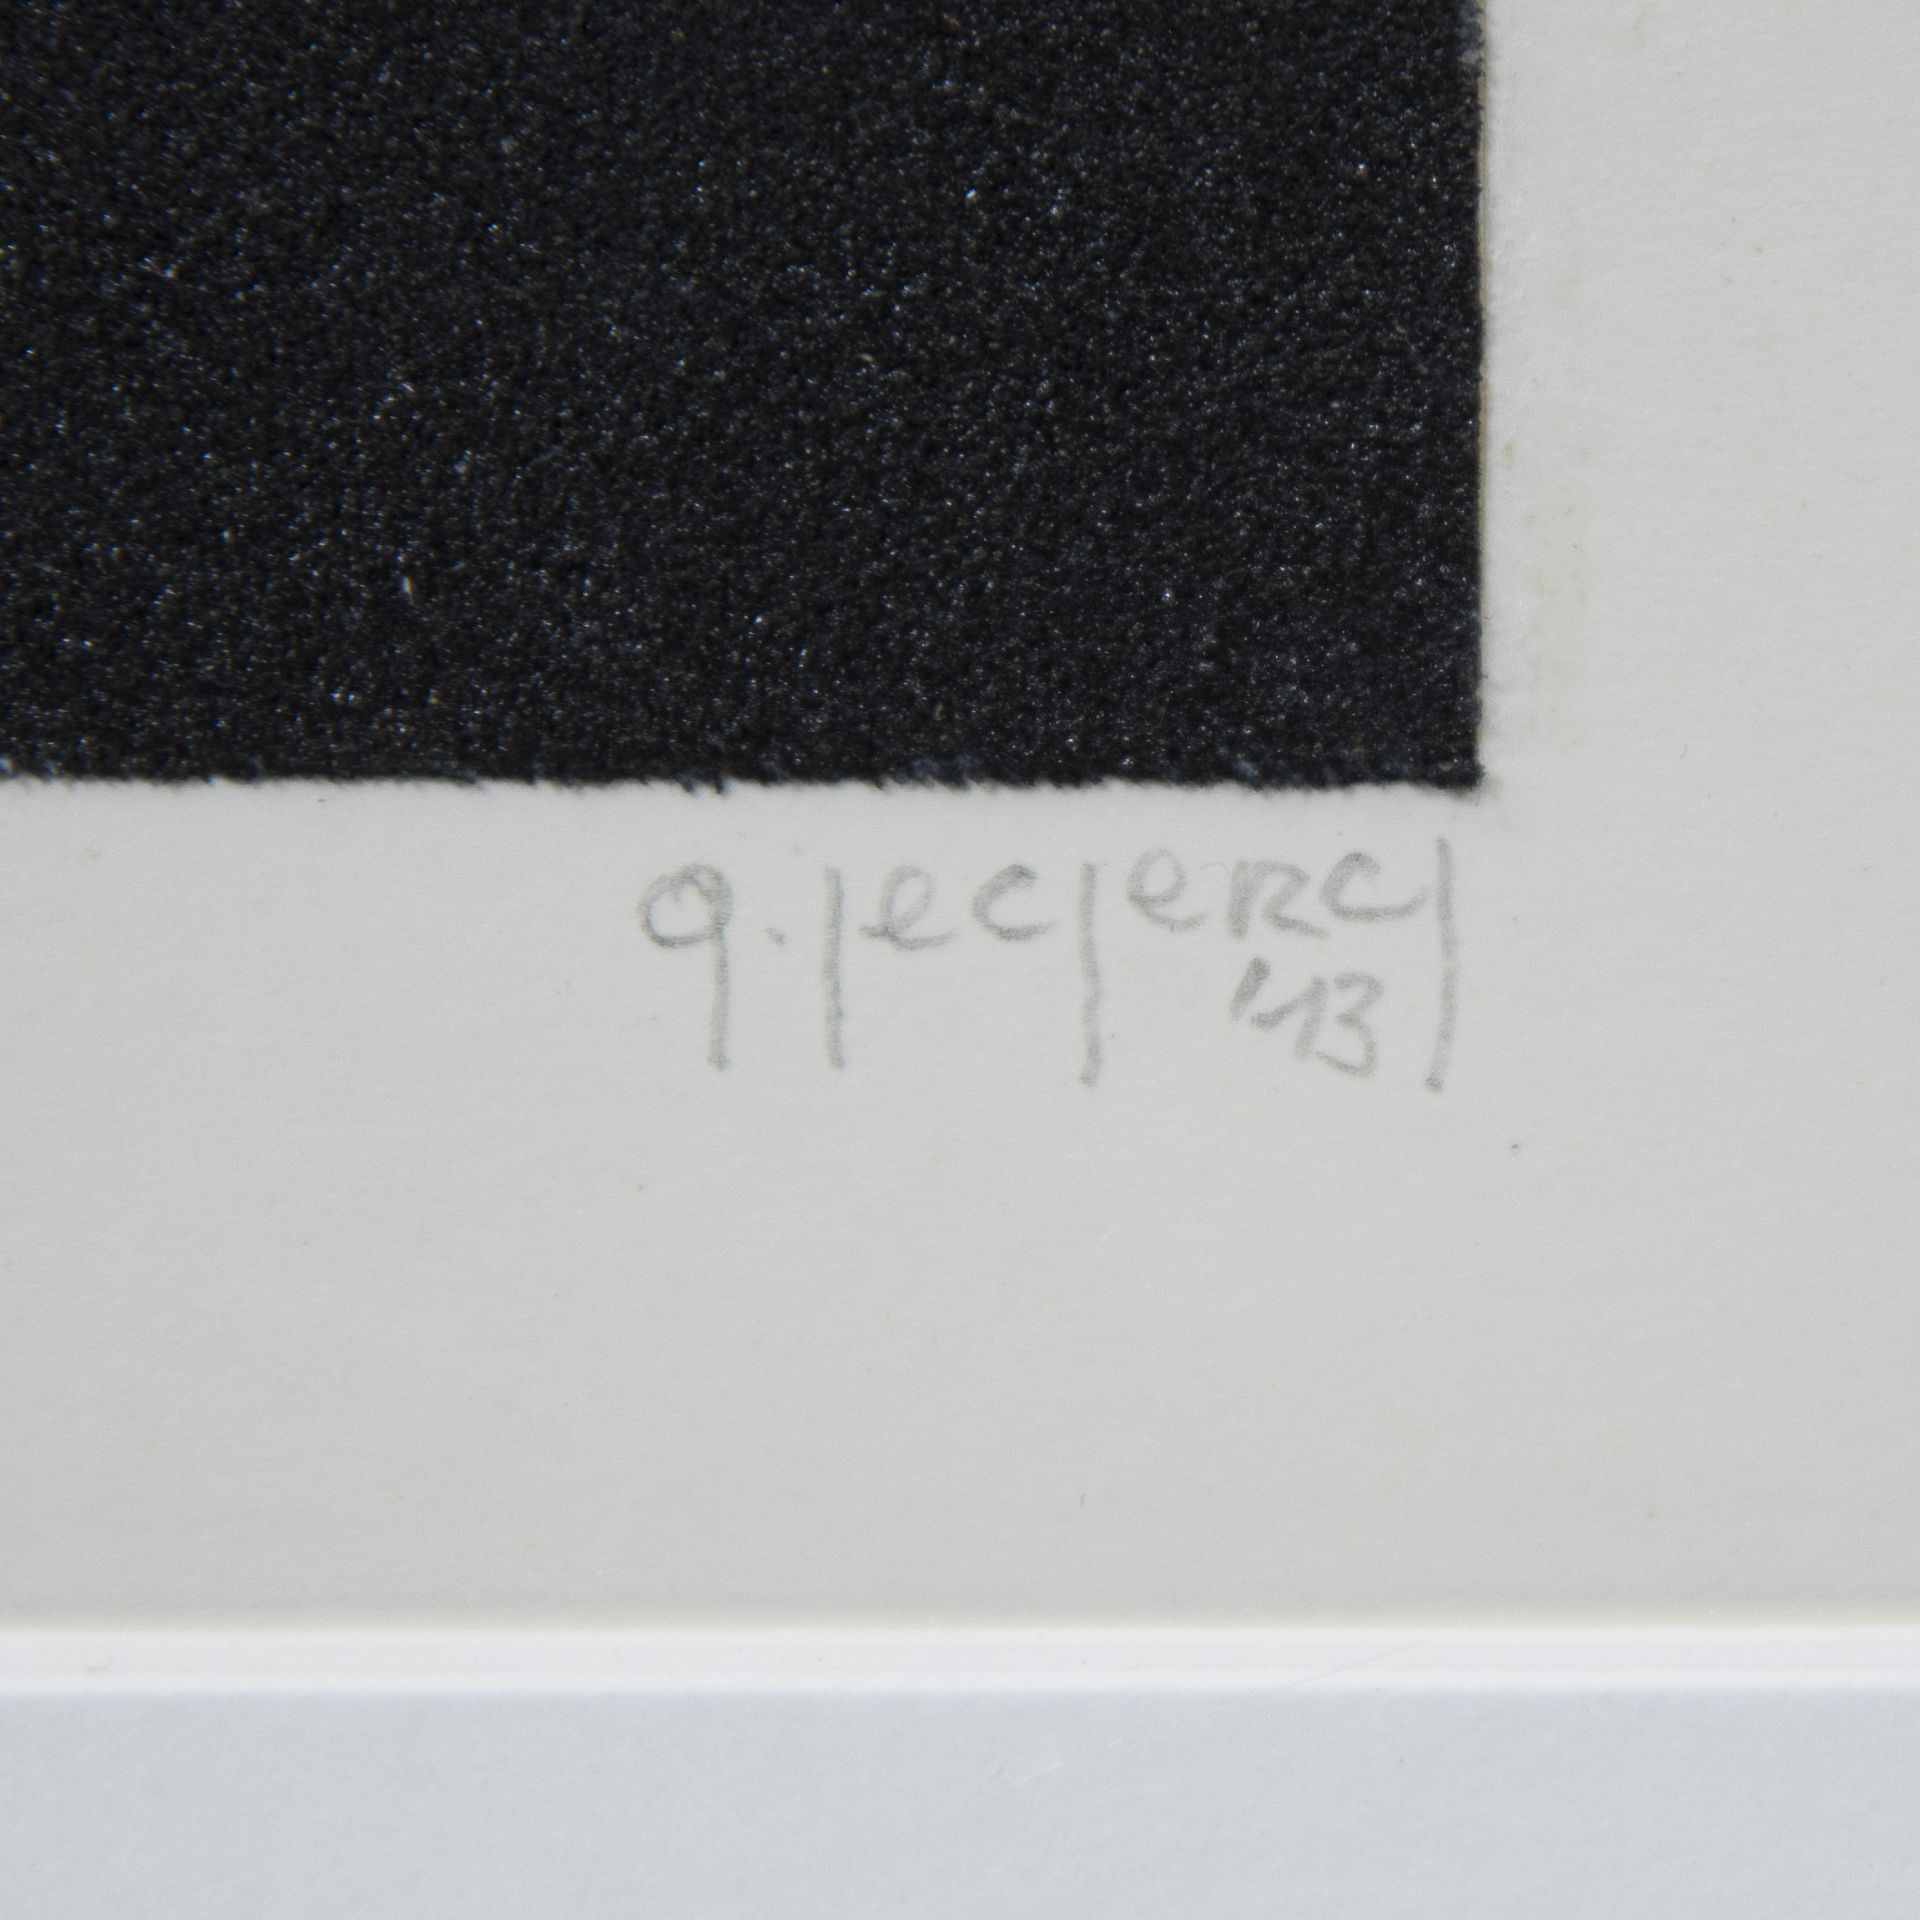 Guy LECLERCQ (1940), collage Untitled, signed and dated 2013 - Image 3 of 3